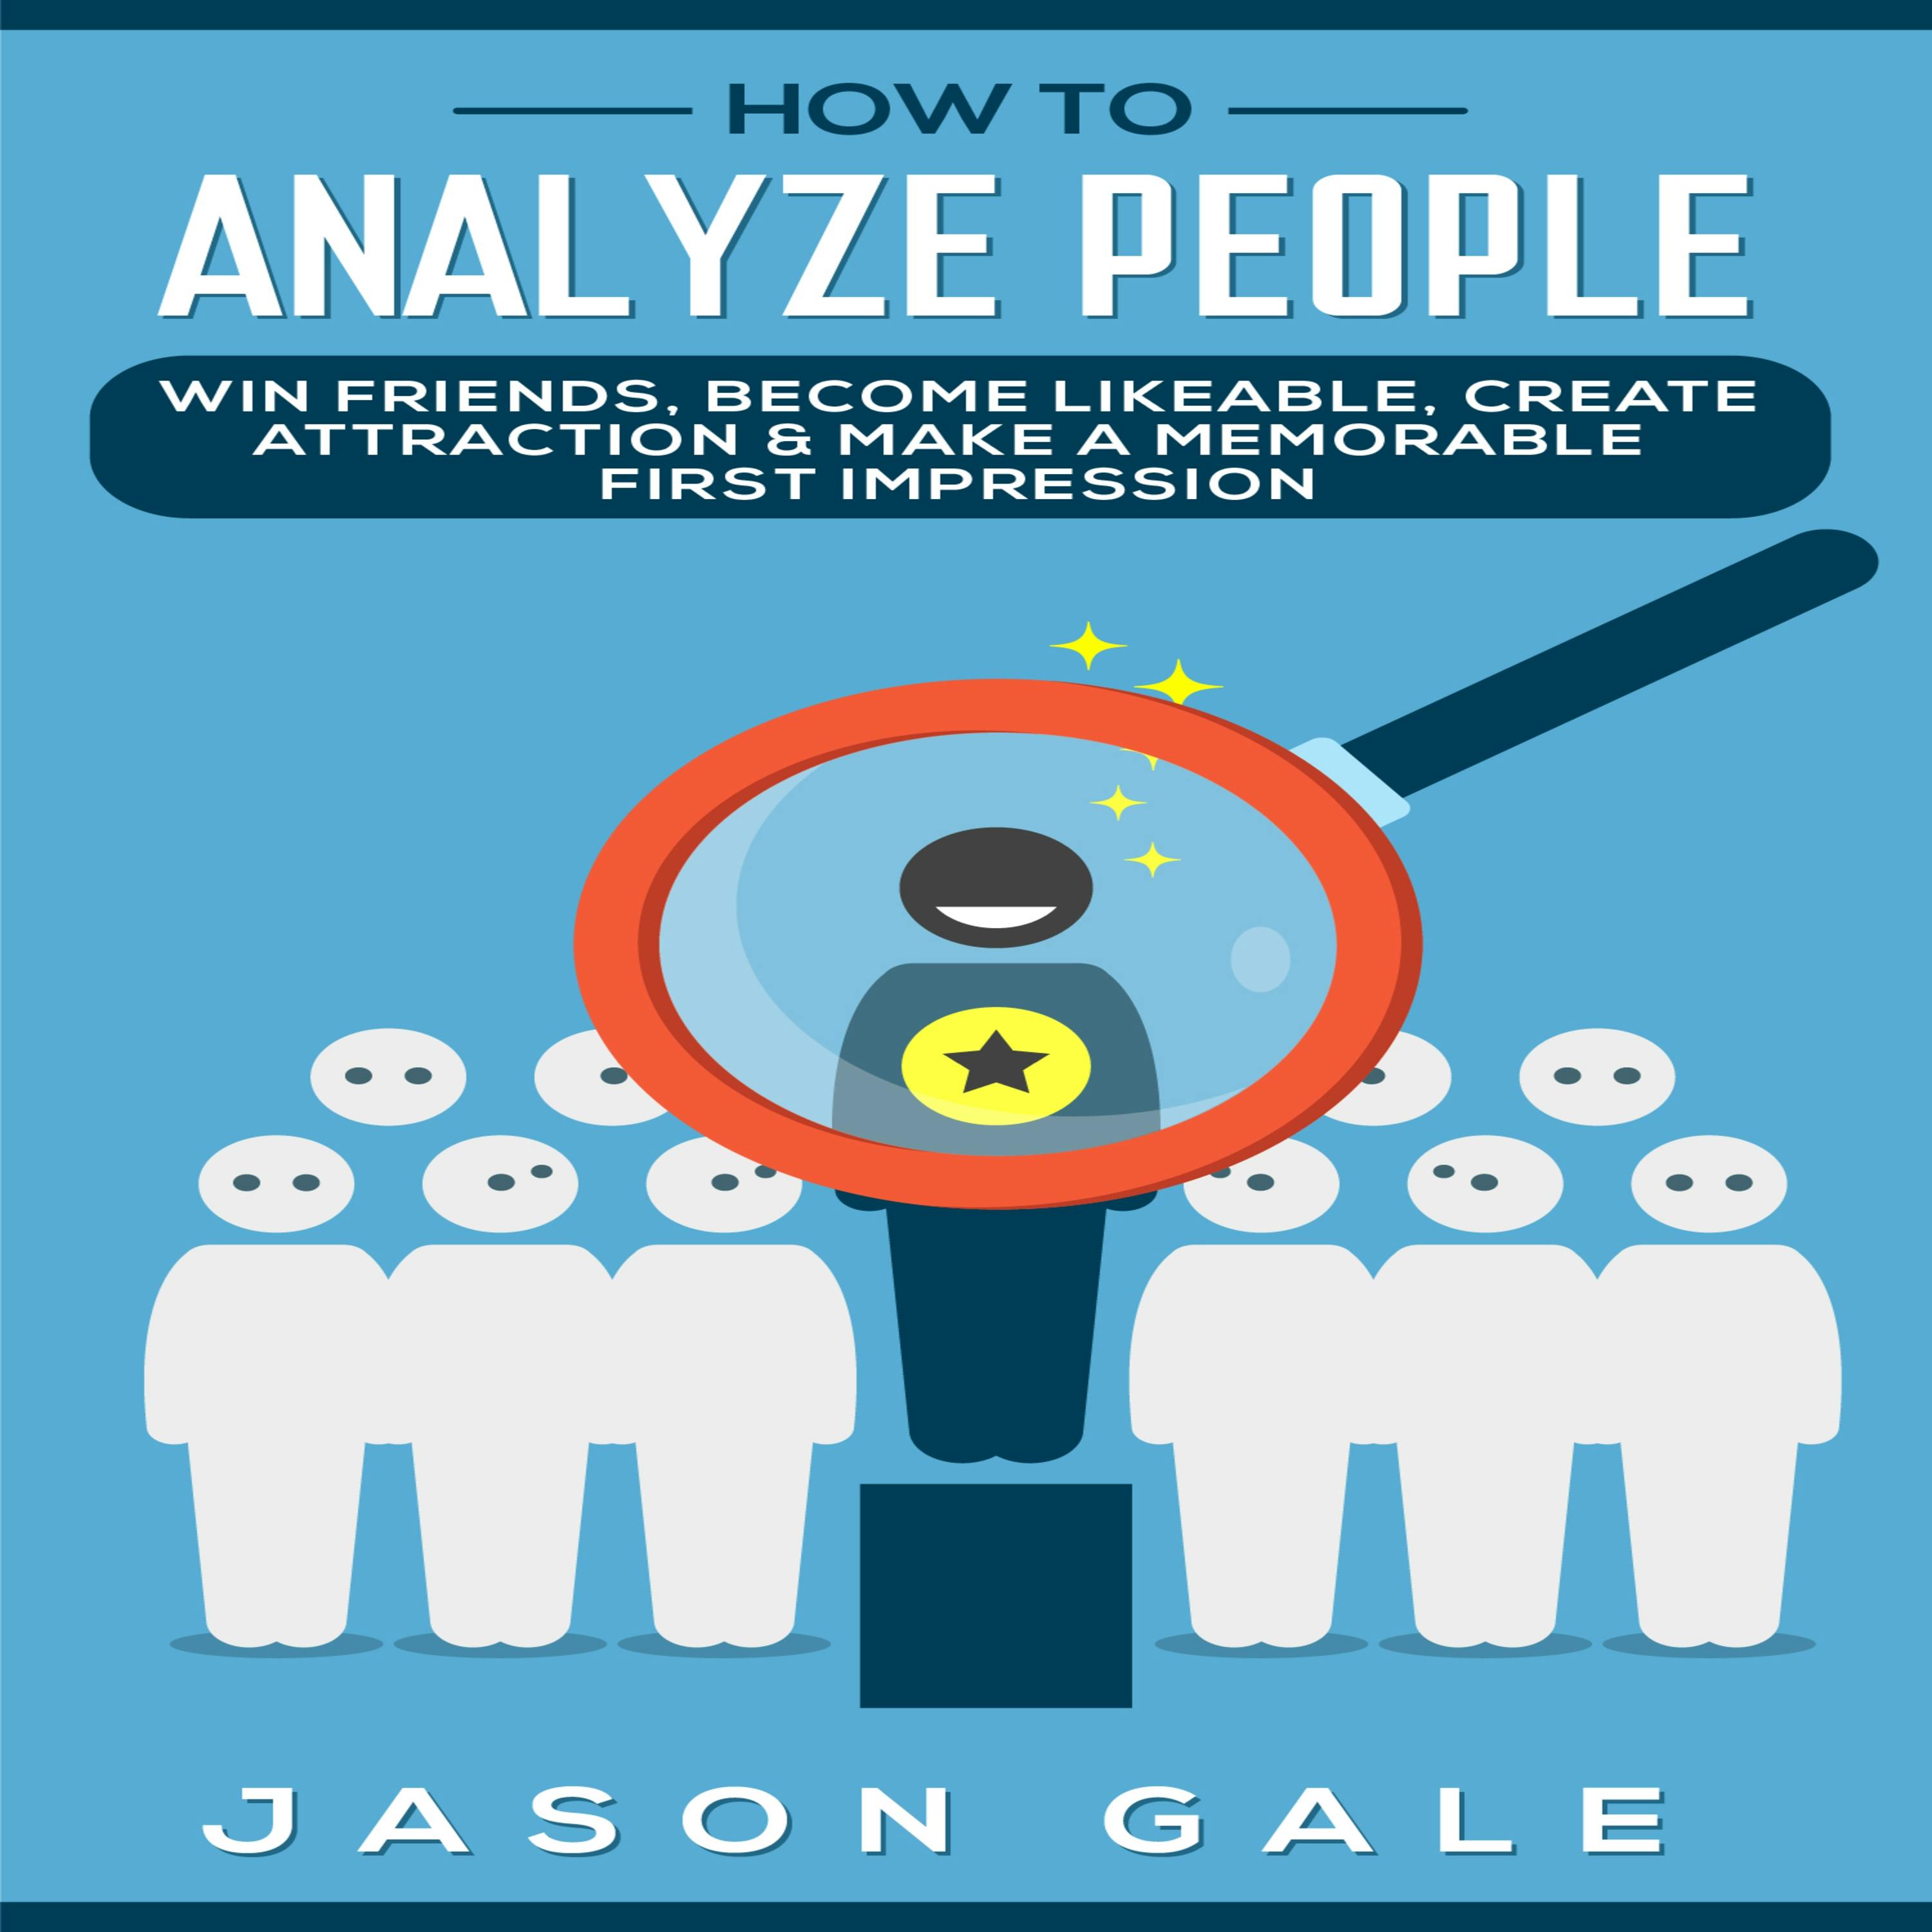 How to Analyze People: Win Friends, Become Likeable, Create Attraction & Make A Memorable First Impression - Jason Gale